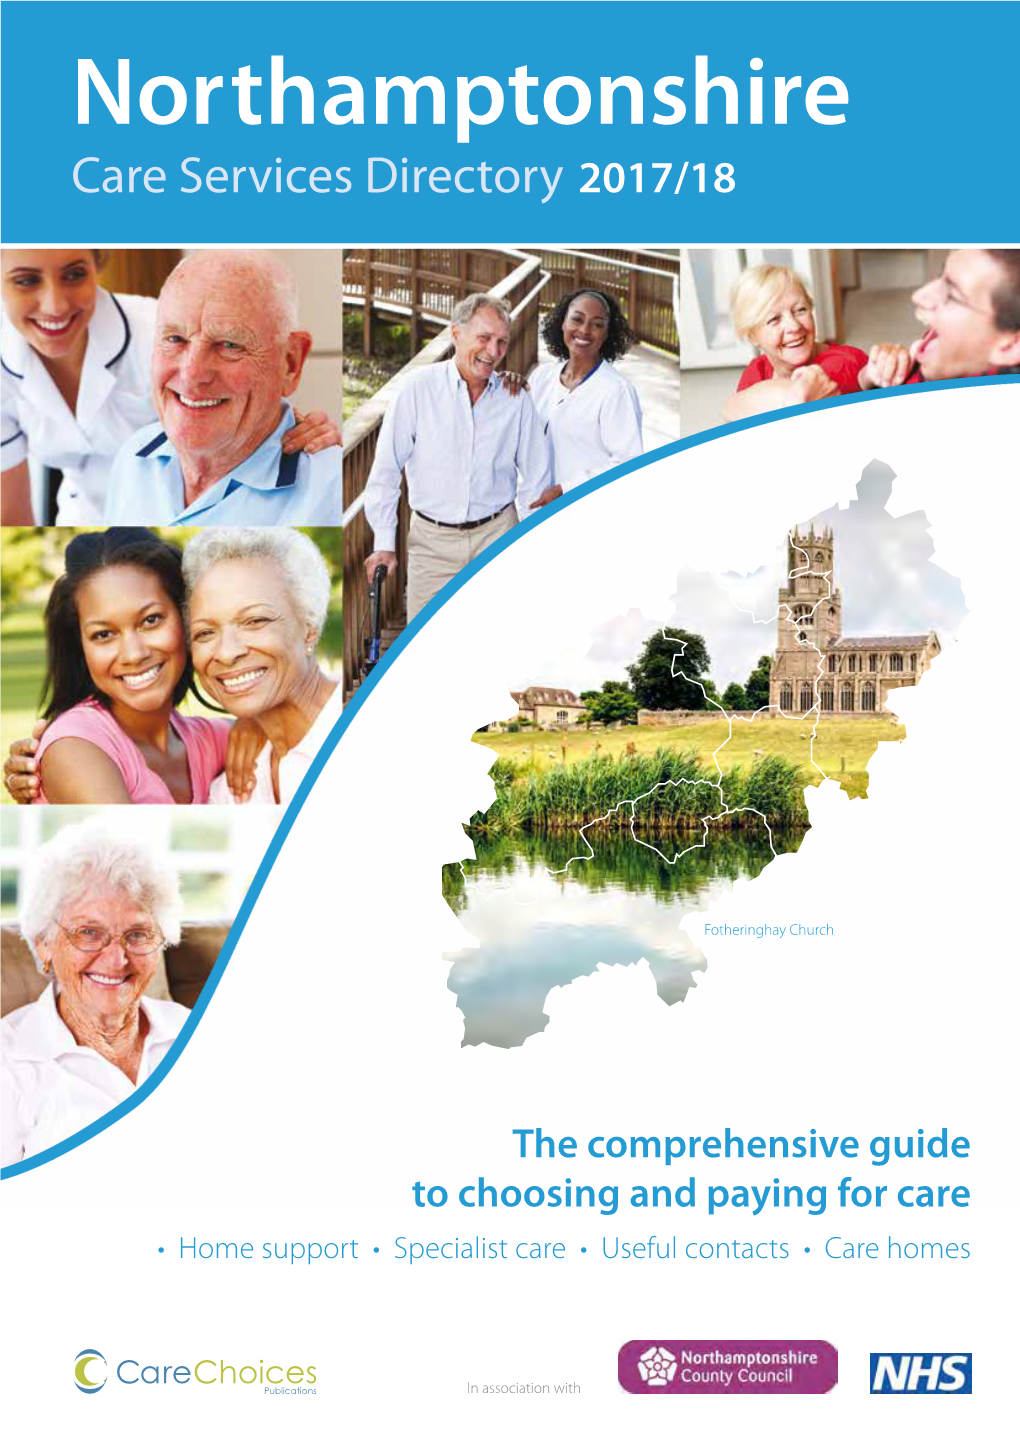 Northamptonshire Care Services Directory 2017/18